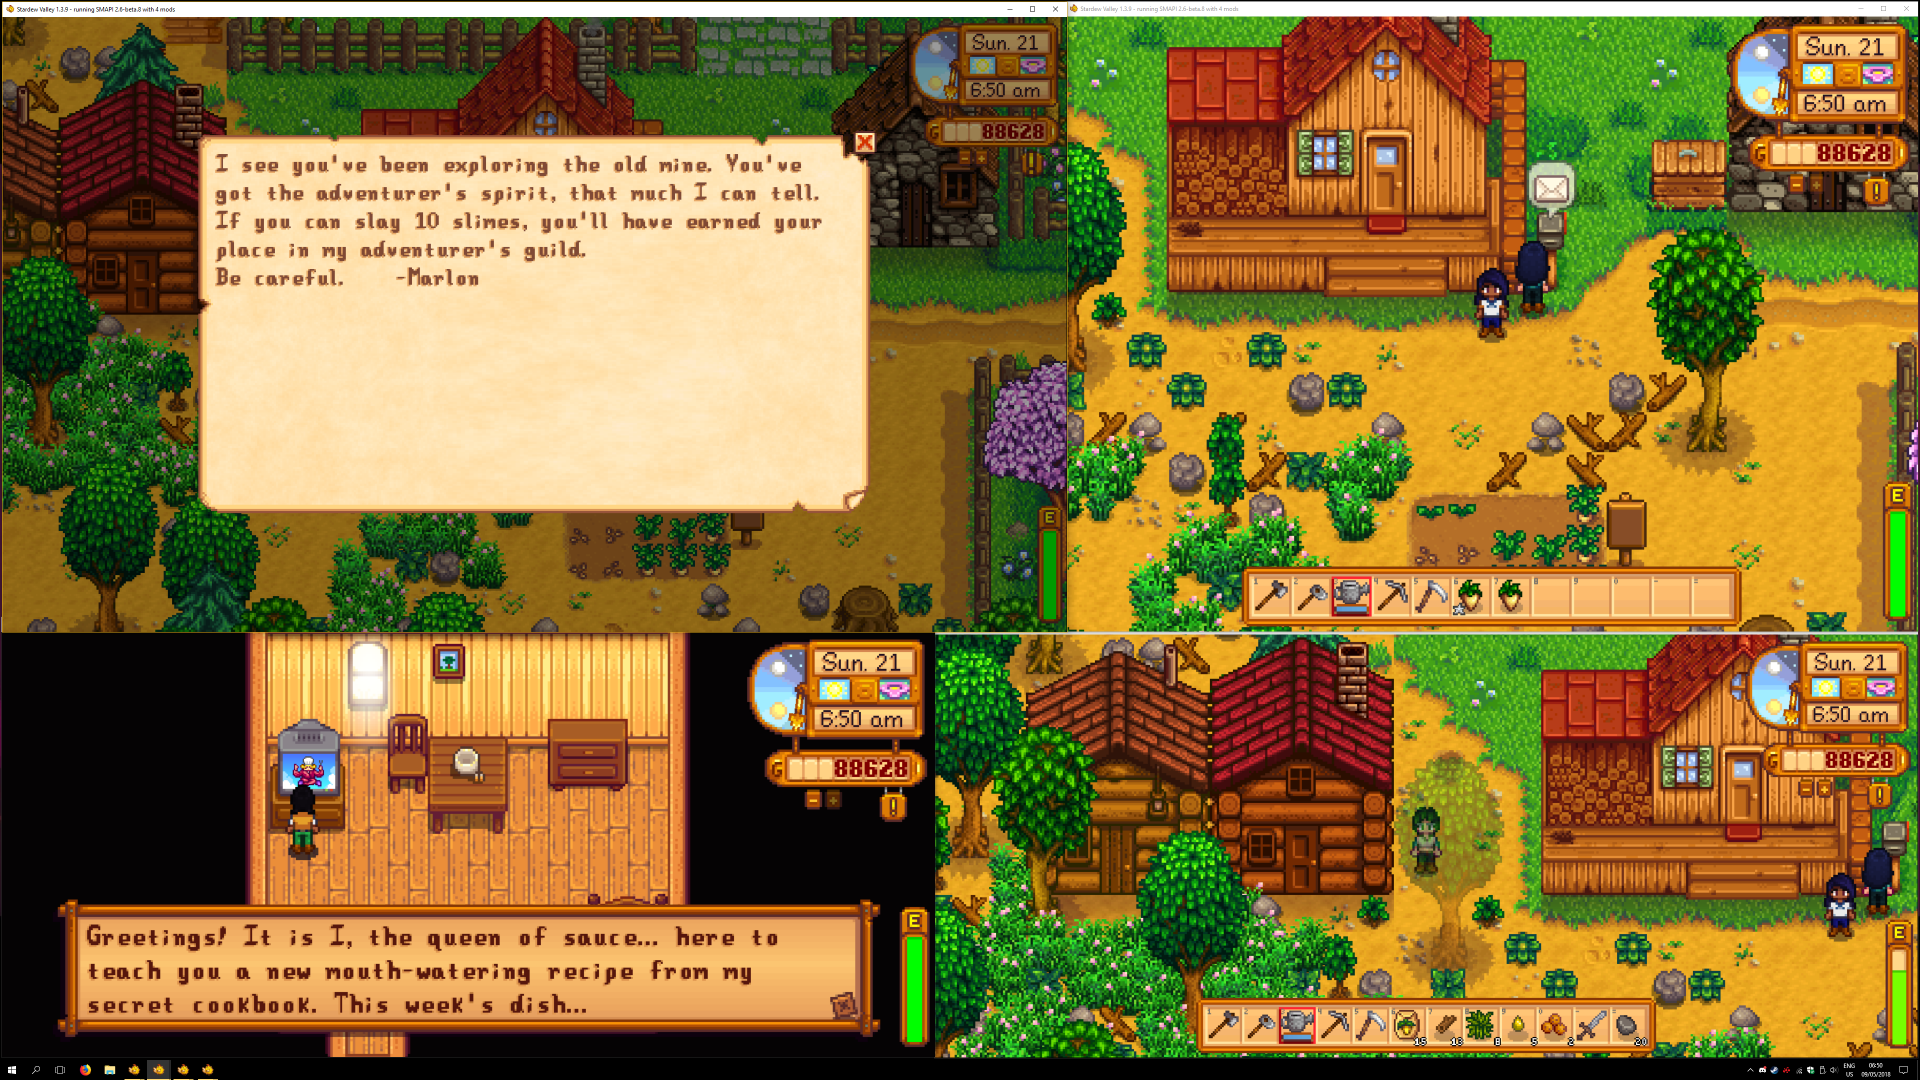 Stardew valley: how to play local co-op multiplayer on every platform